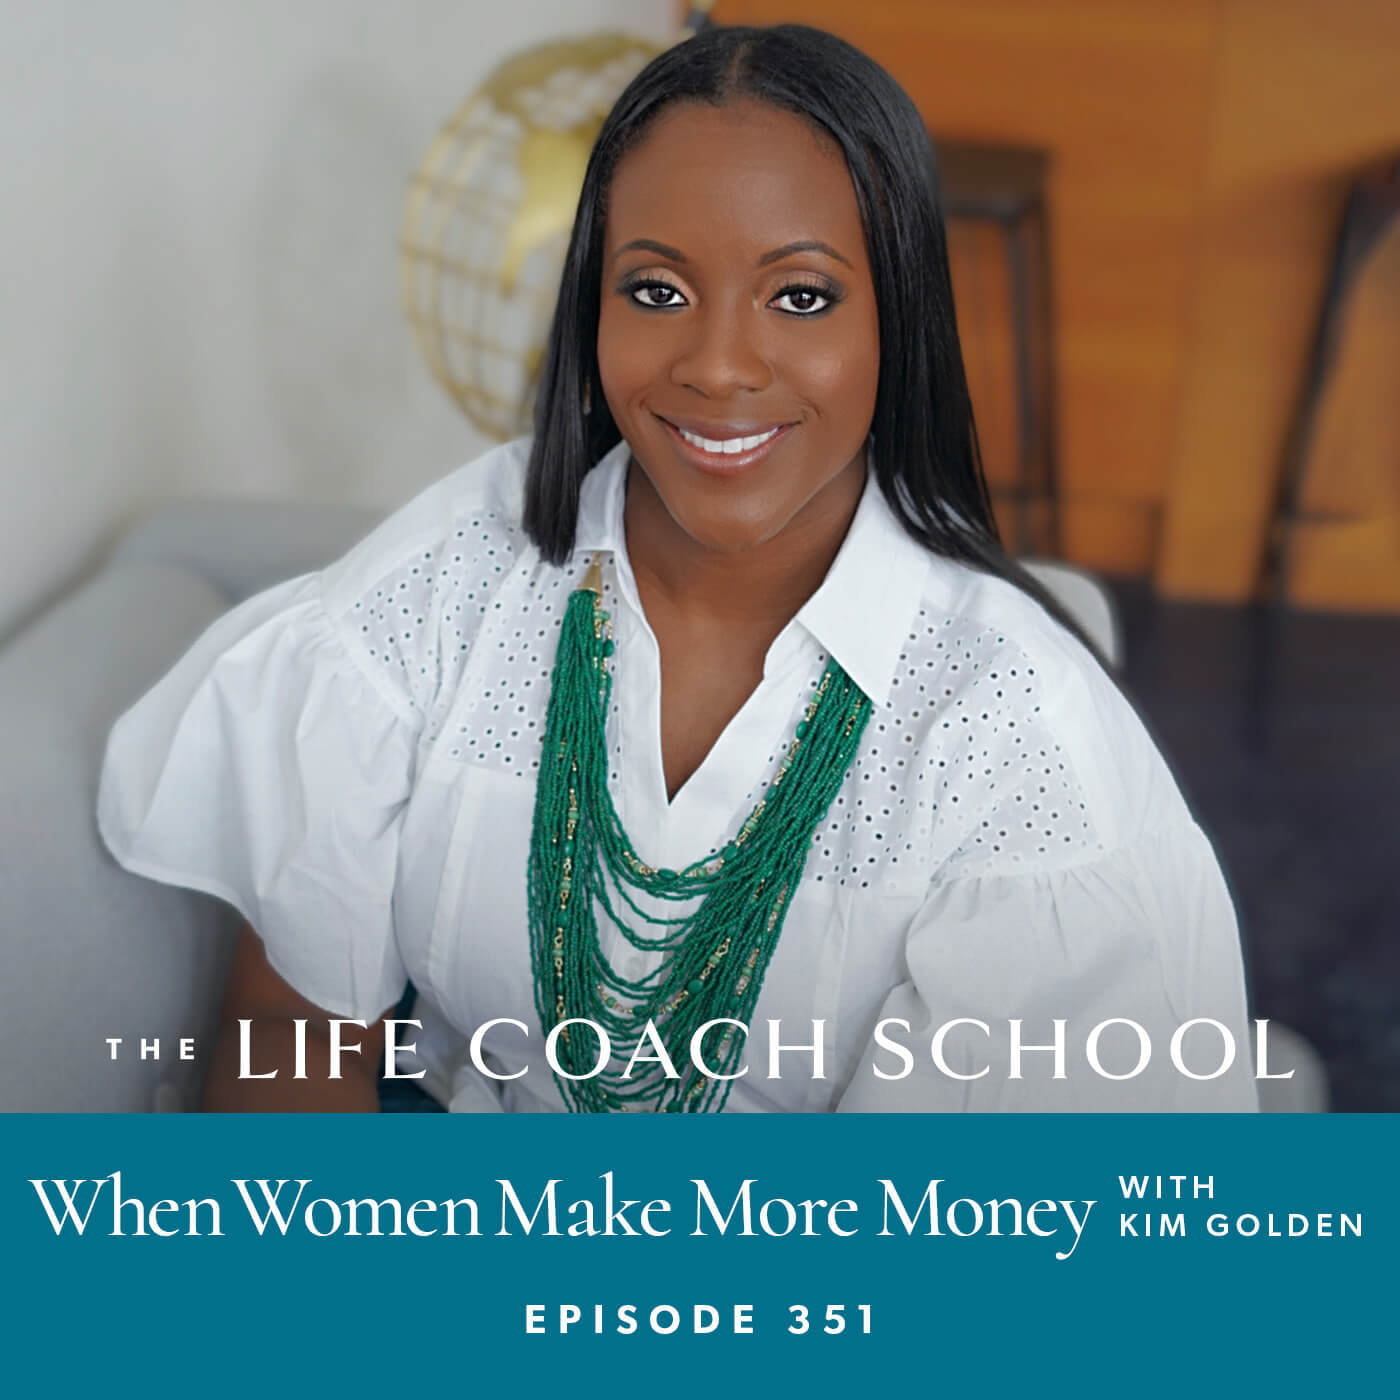 The Life Coach School Podcast with Brooke Castillo | When Women Make More Money with Kim Golden